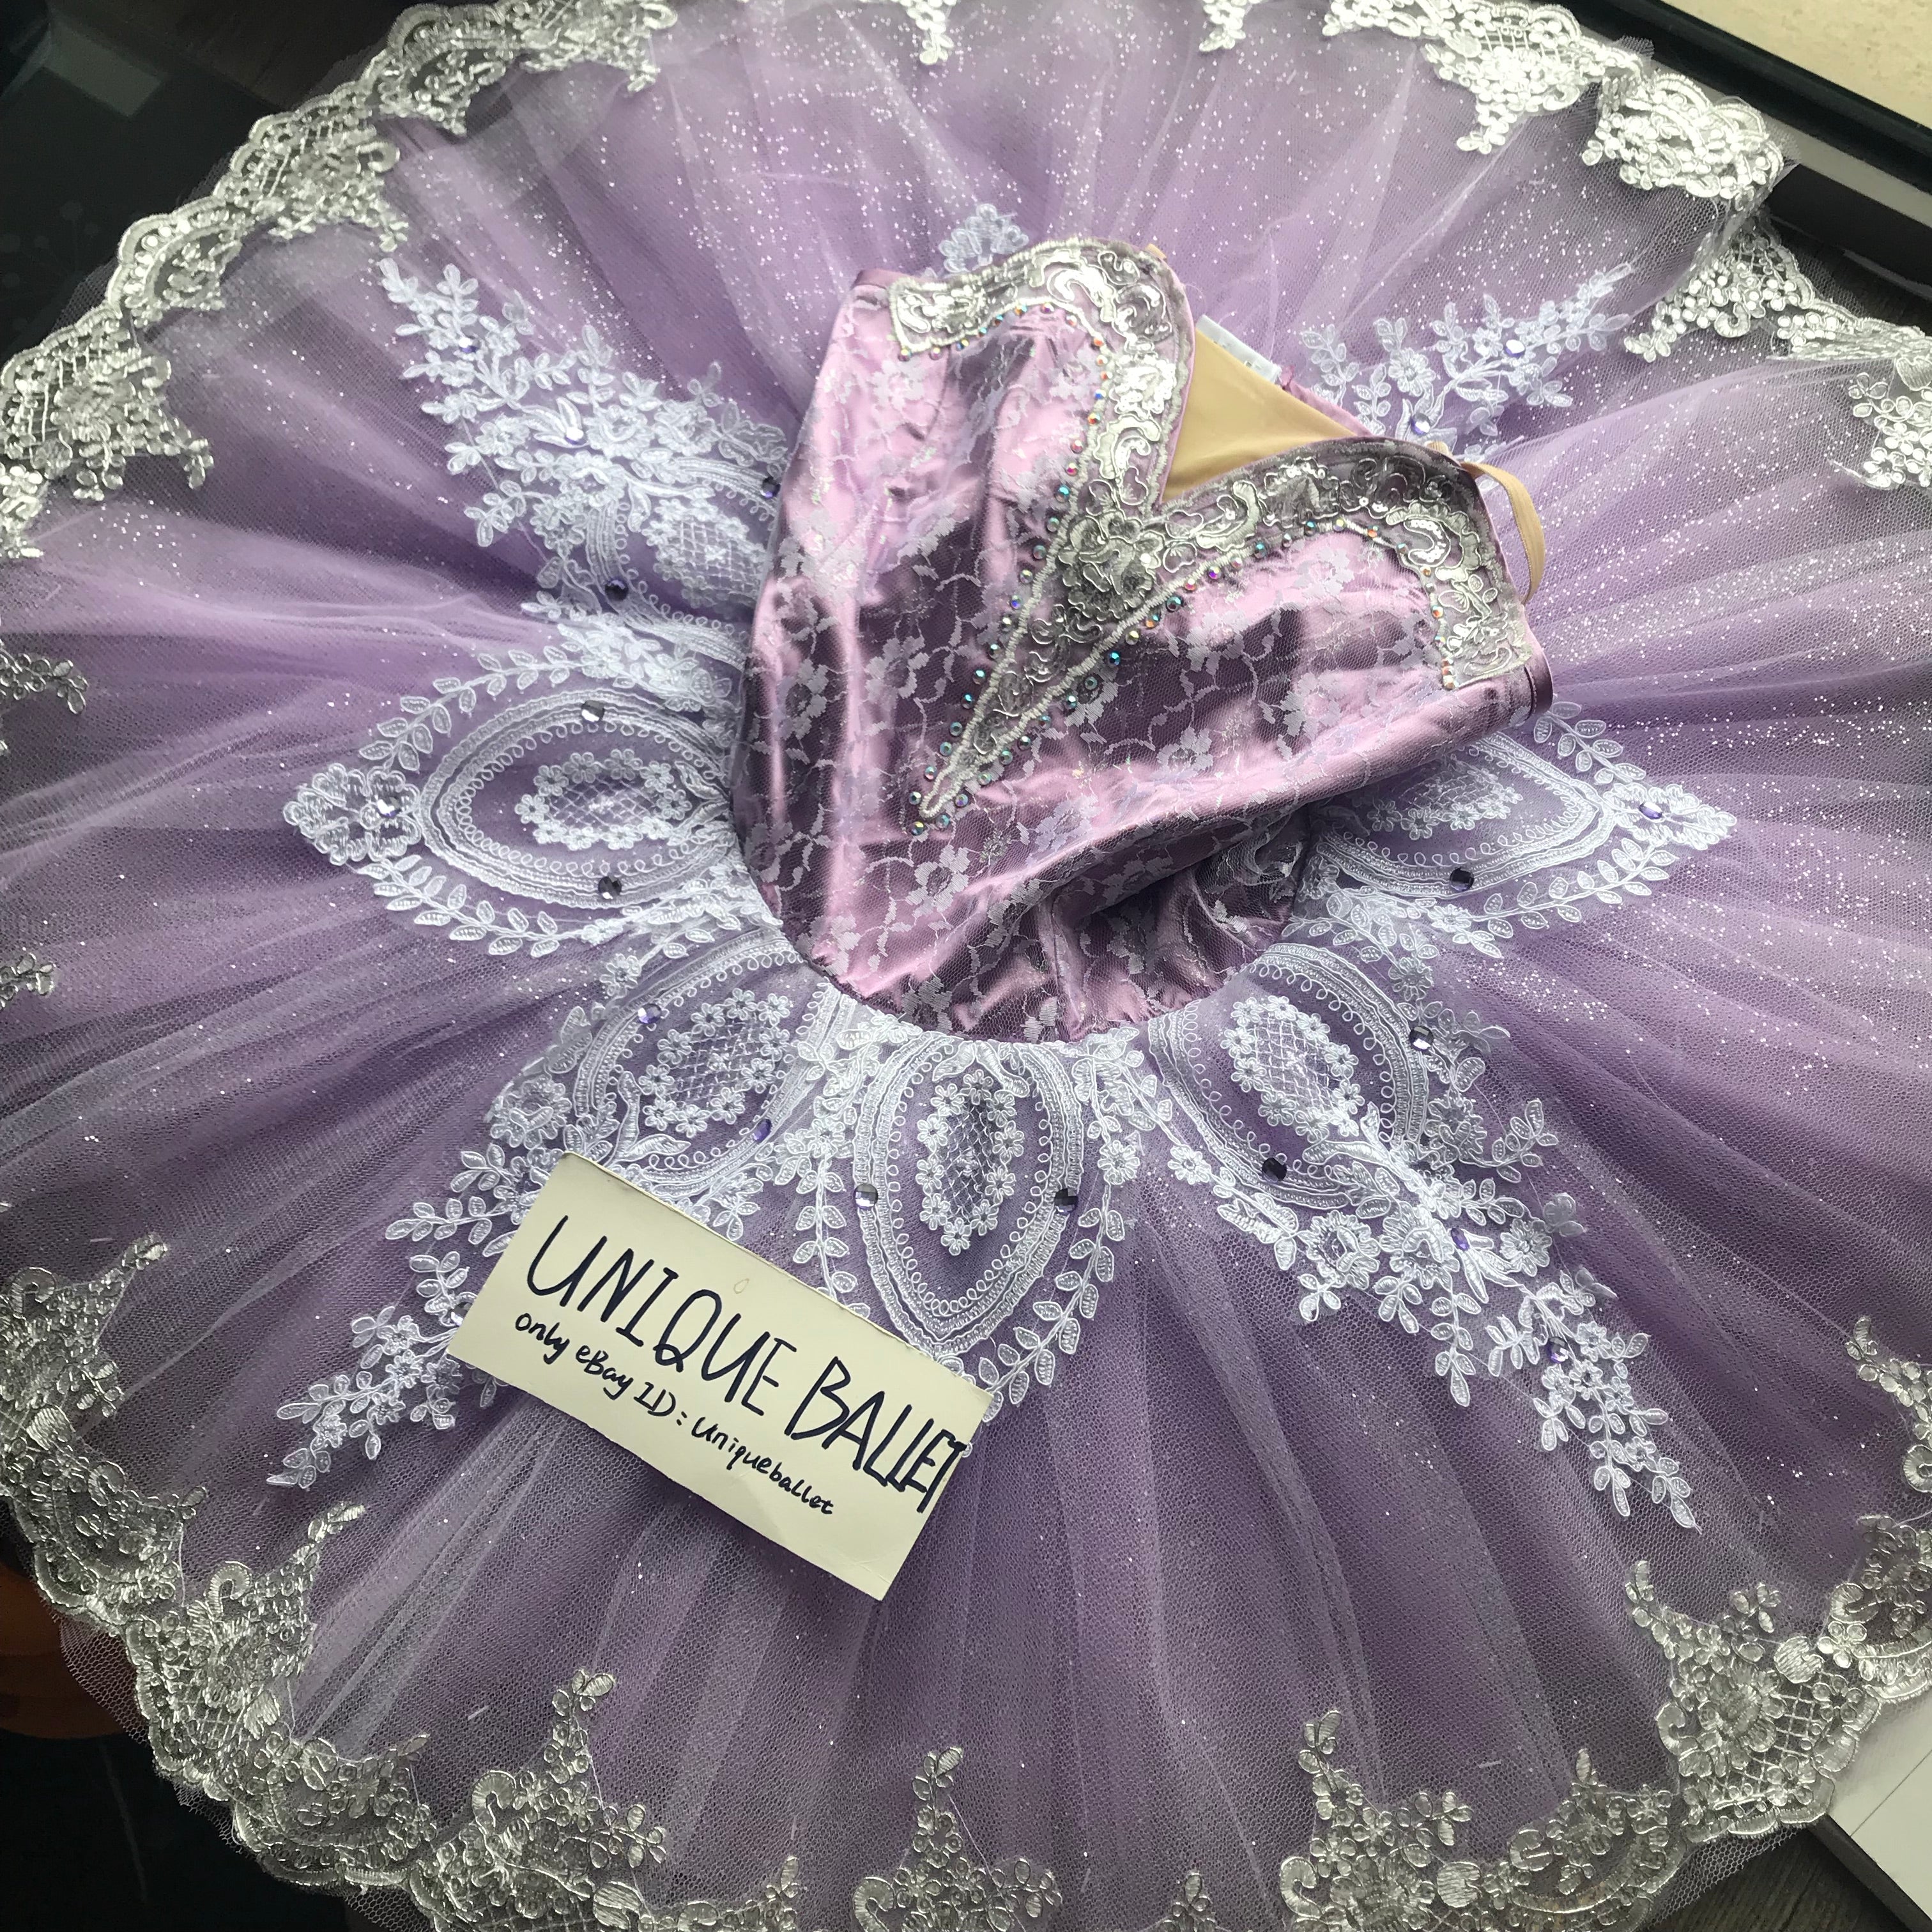 Professional Sleeping Beauty Lilac Fairy Classic Ballet TuTu Costume With Hooks